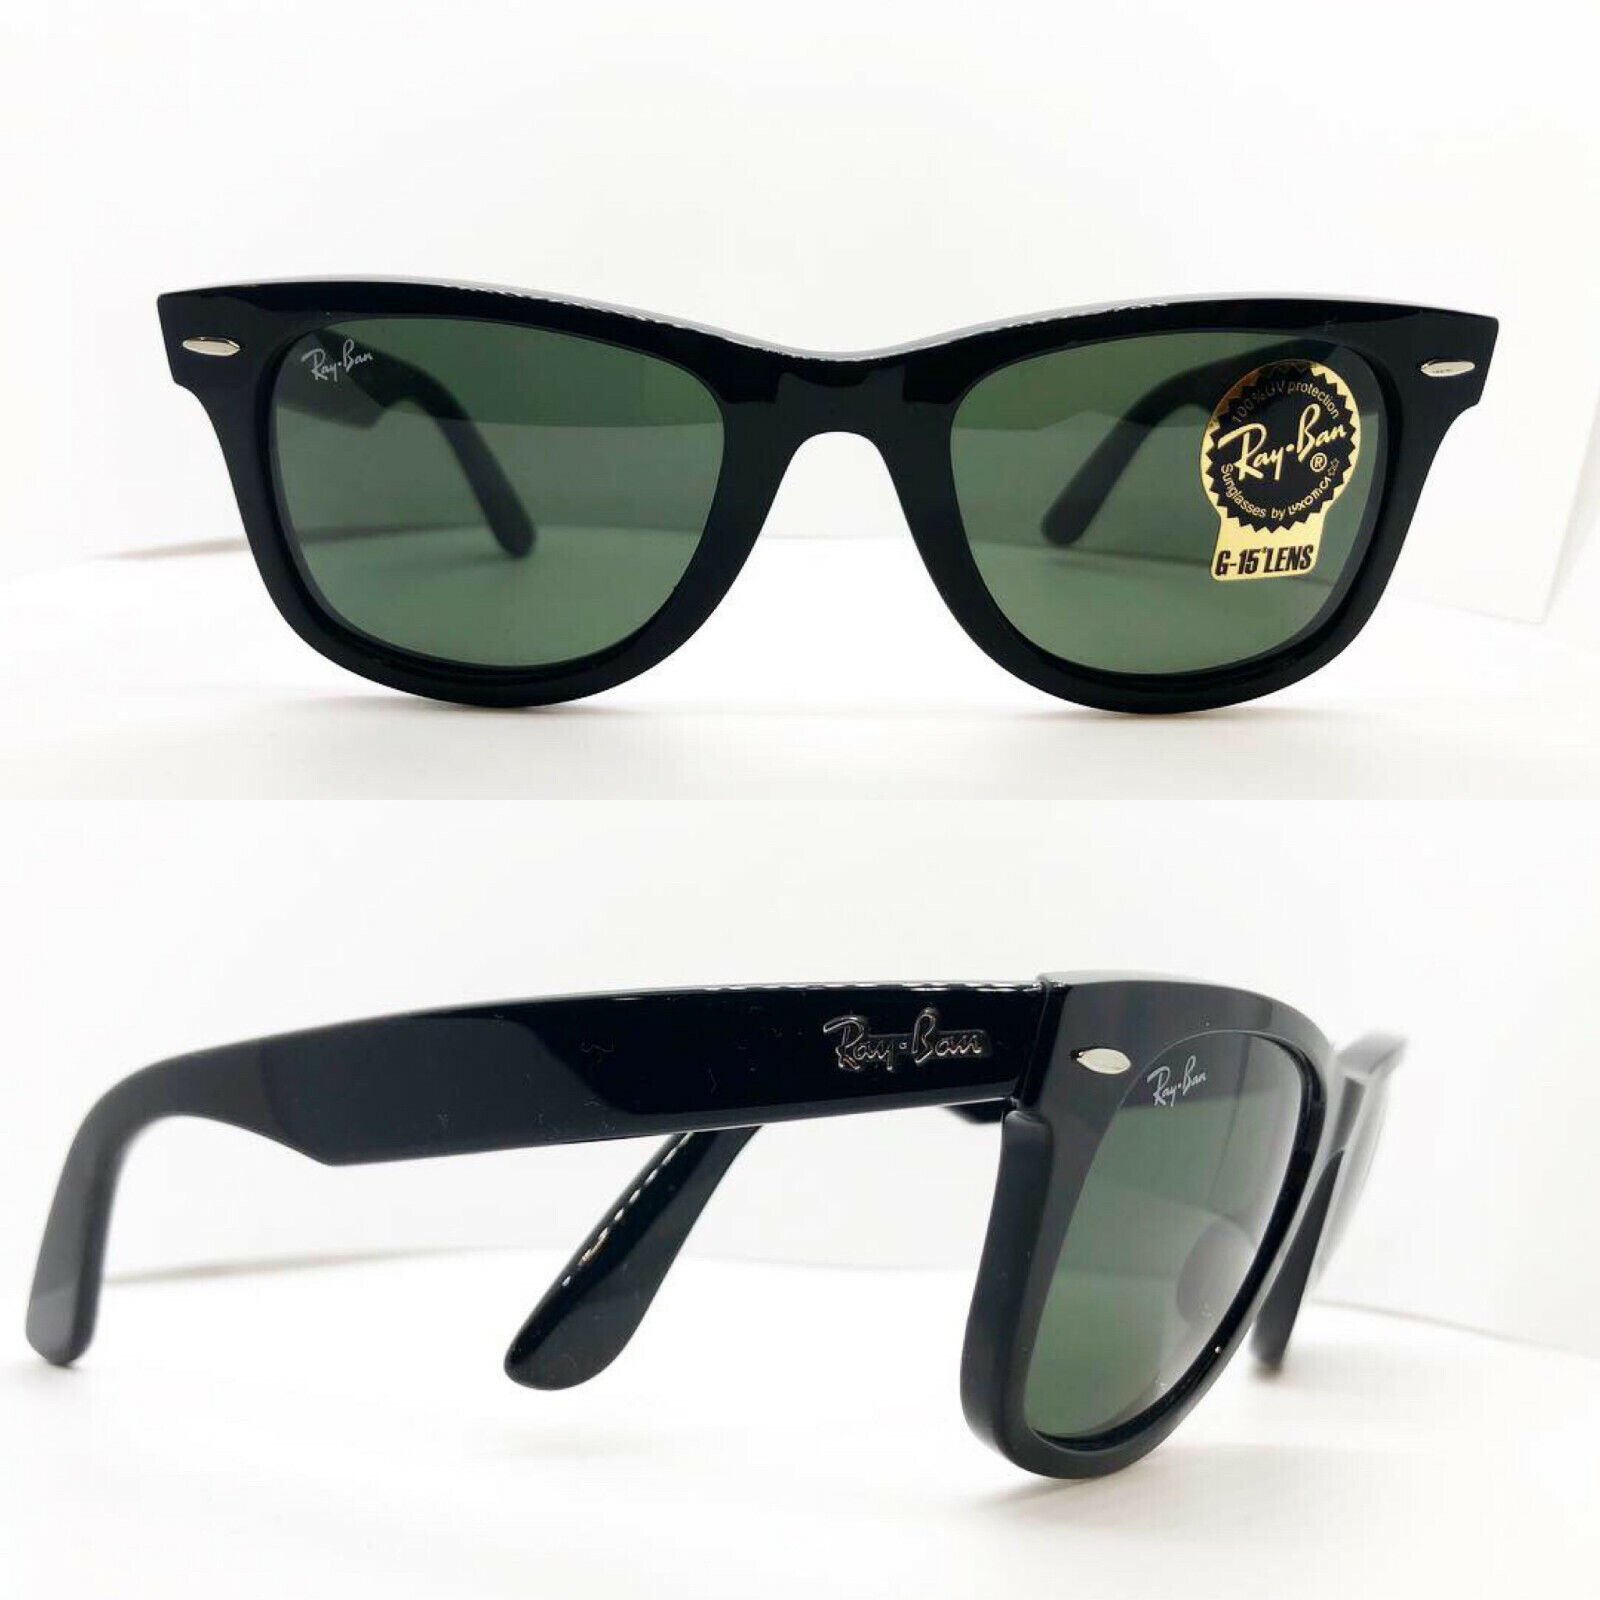 Ray-Ban Wayfarer - RB 2140 - genuine made in italy -sunglasses